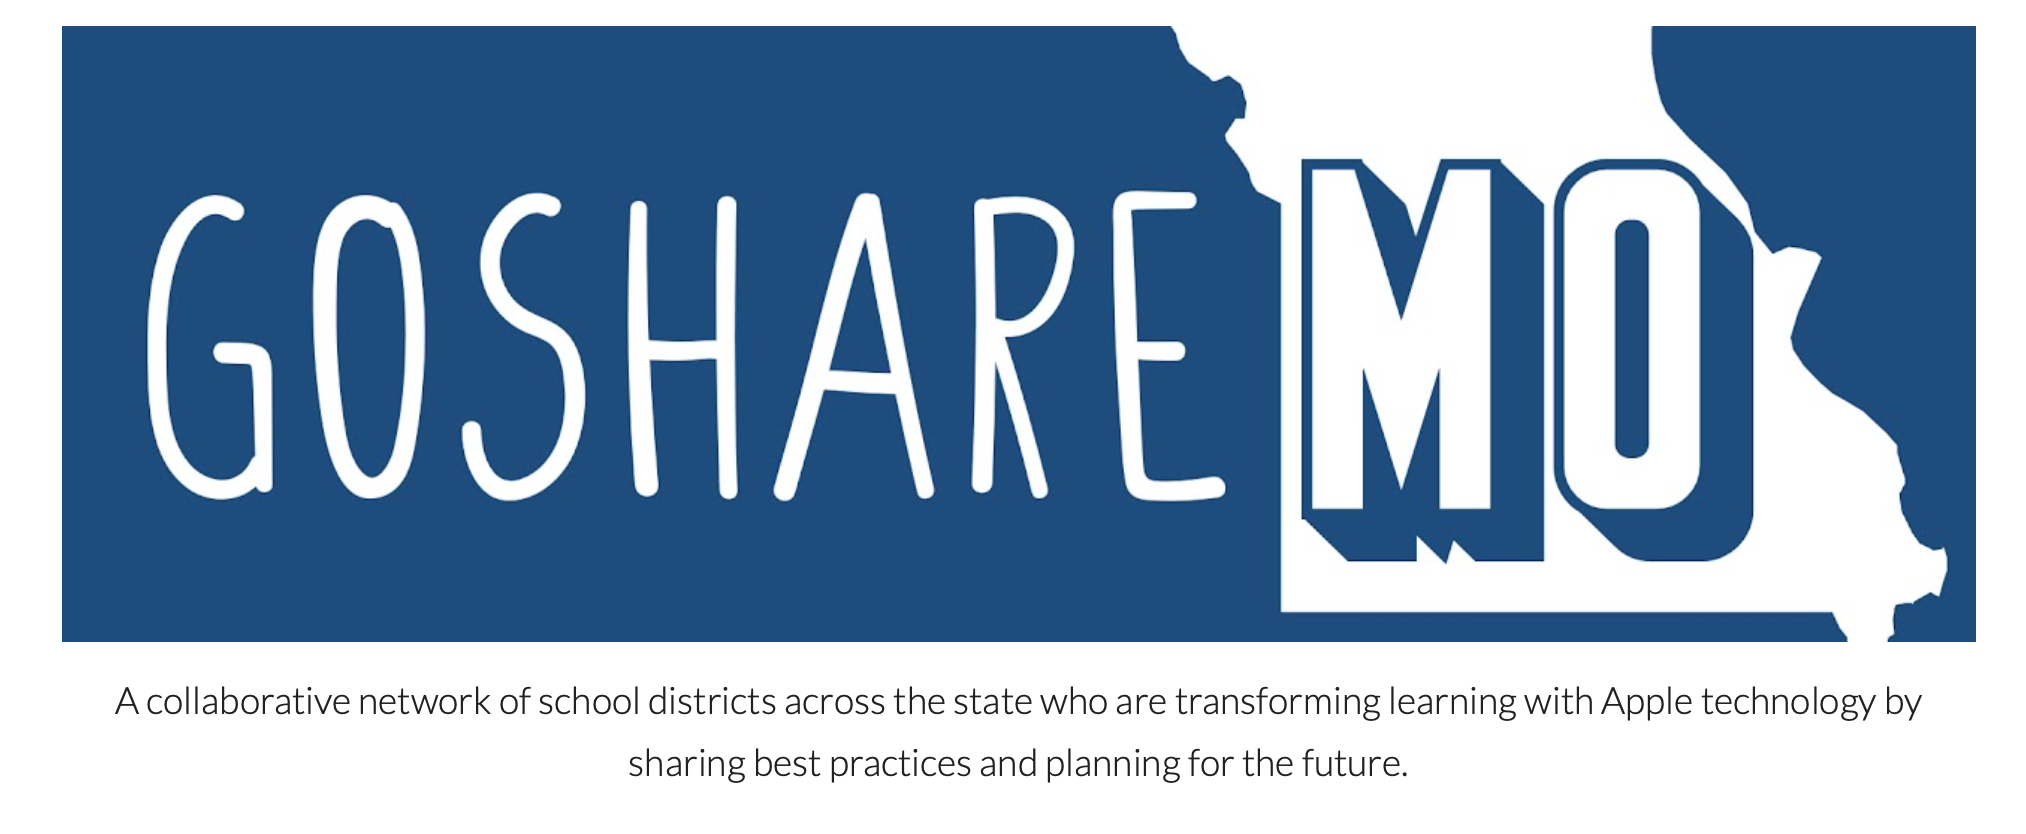 Gosharemo logo with mission: A collaborative network of schools across the state who are transforming learning with Apple.